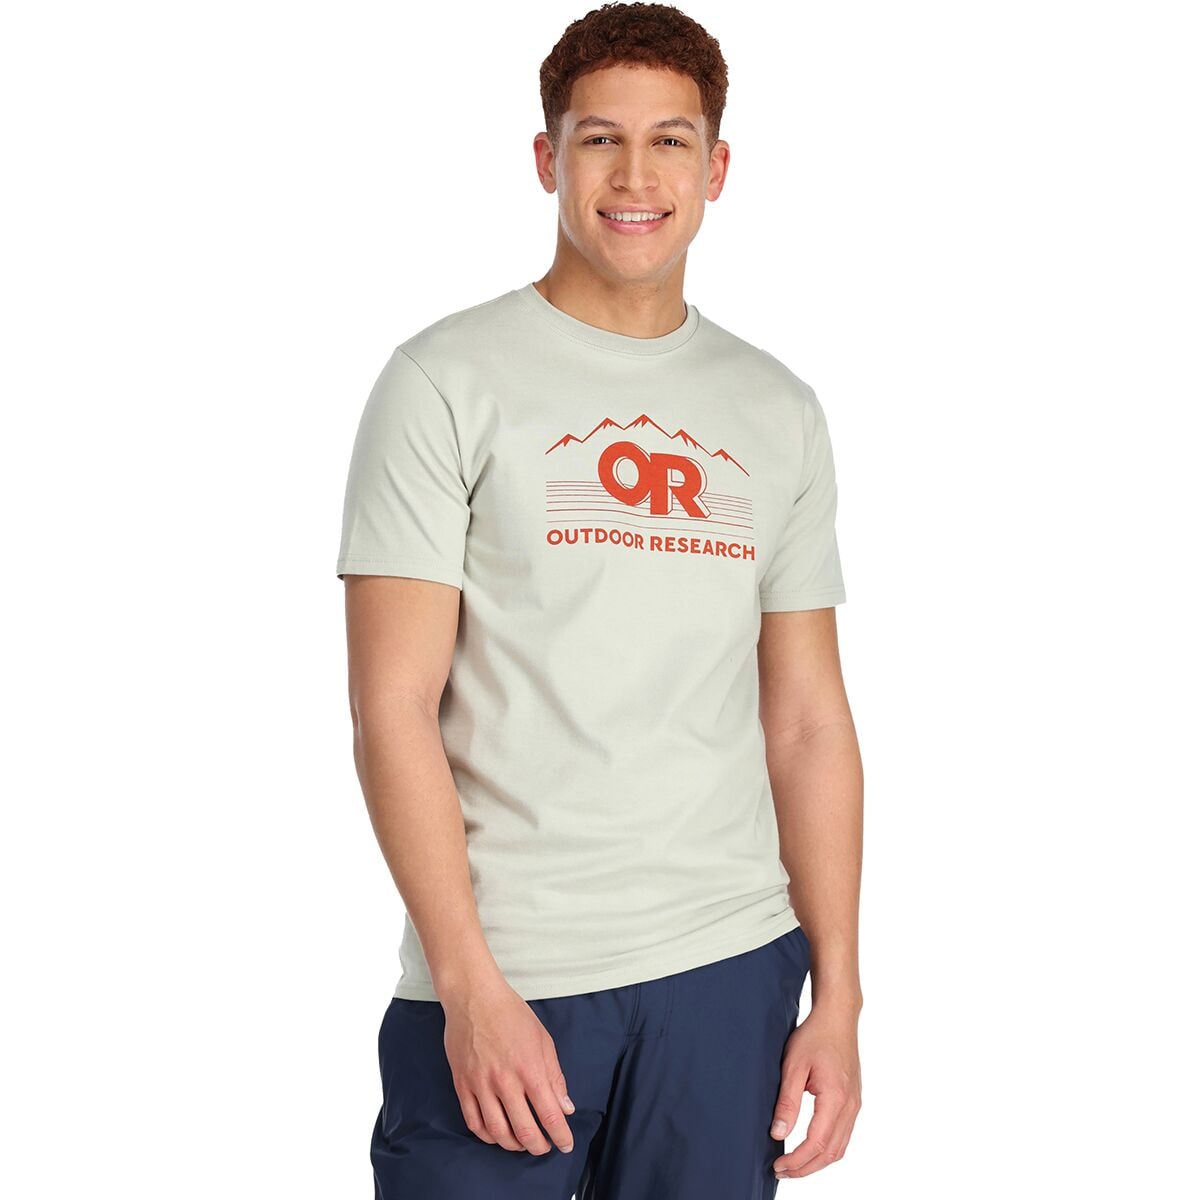 Outdoor Research OR Advocate T-Shirt - Men's